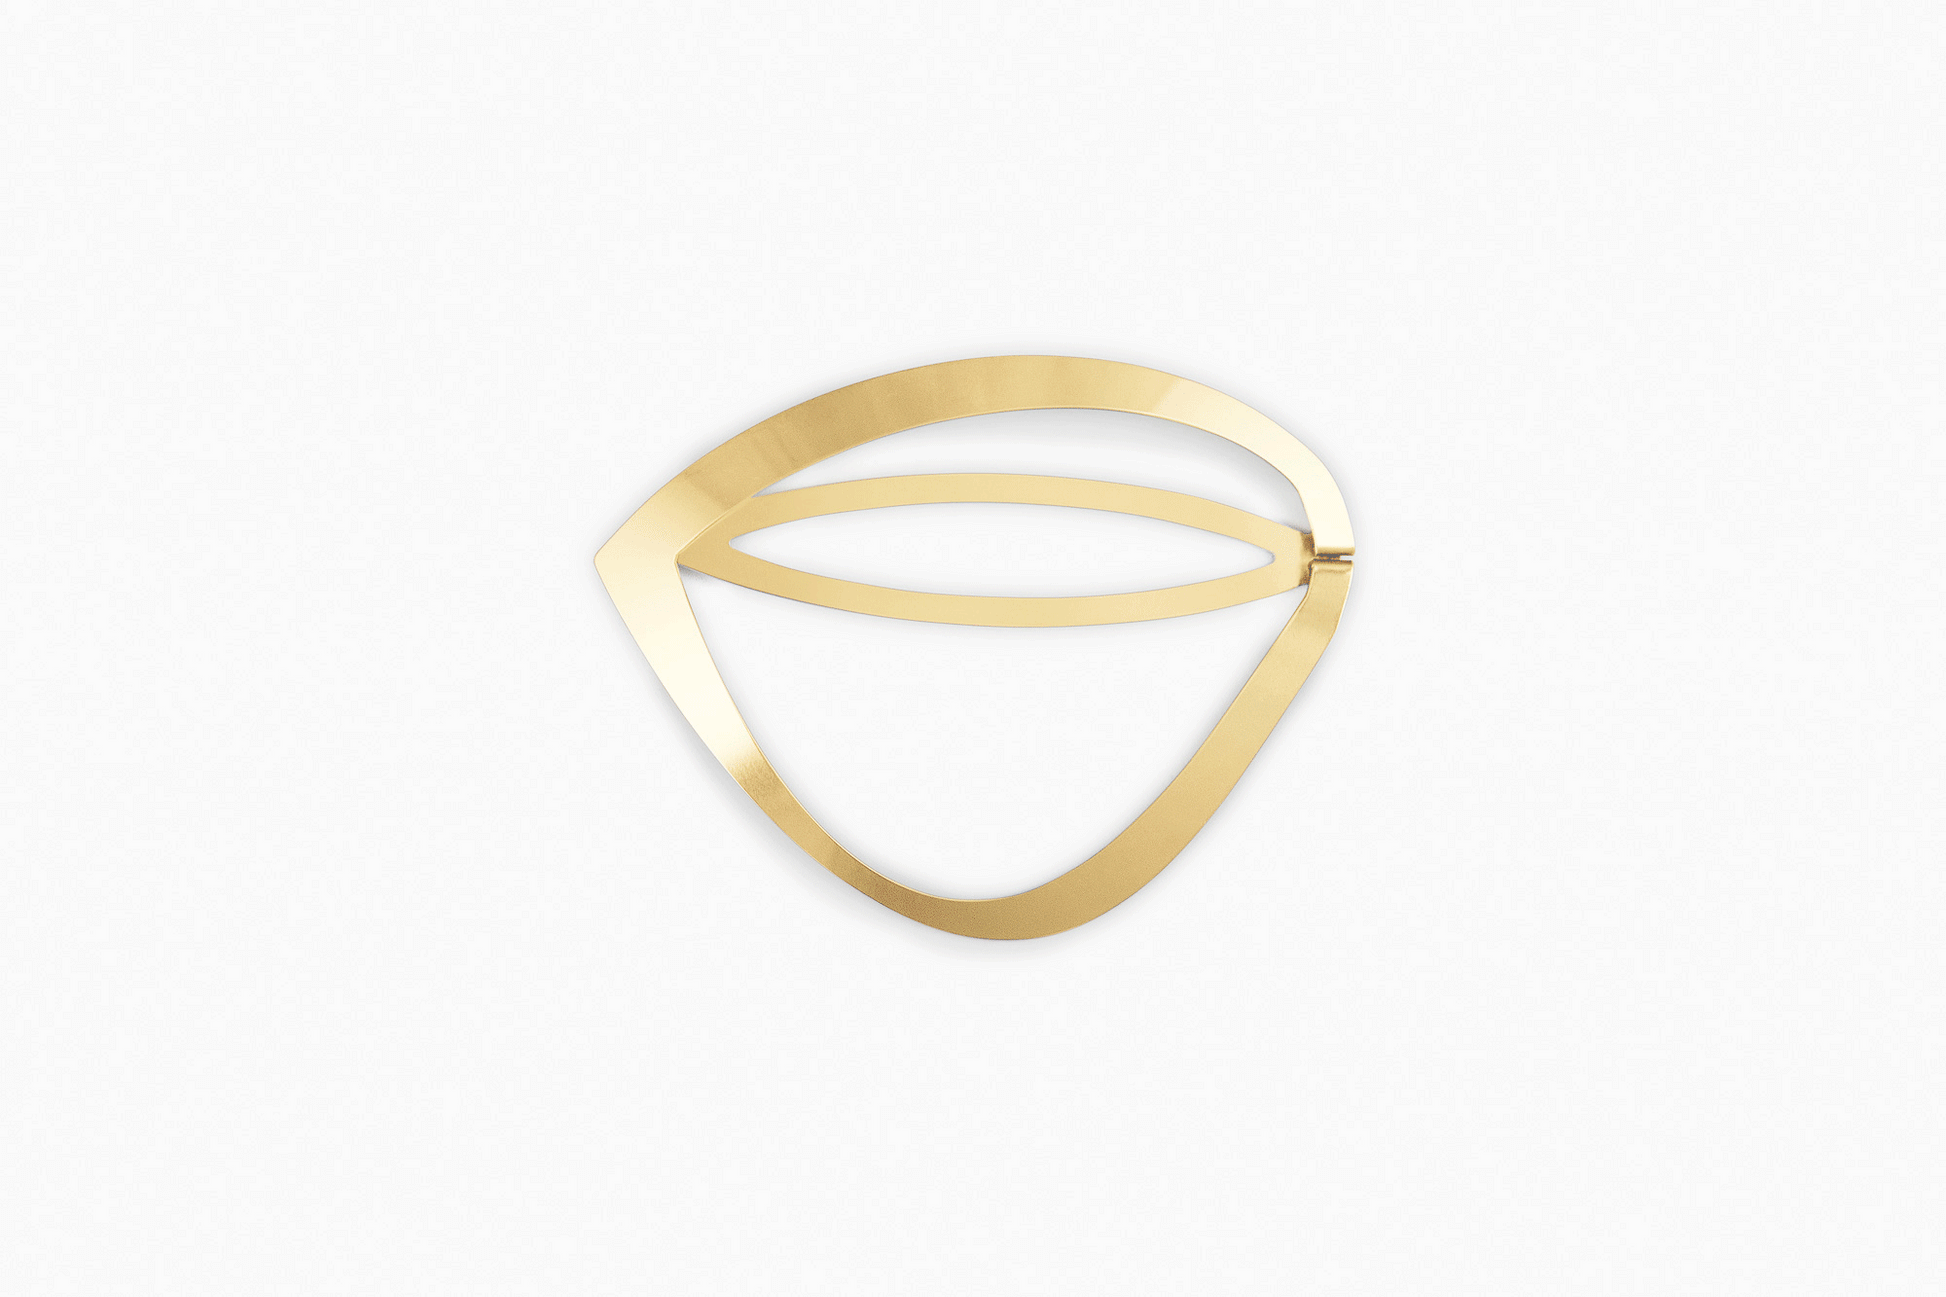 Product images of artistically shaped designer hair clip BARBARA by CLINQ. Available in silver-tone, silver-plated, gold-plated and rosegold-plated